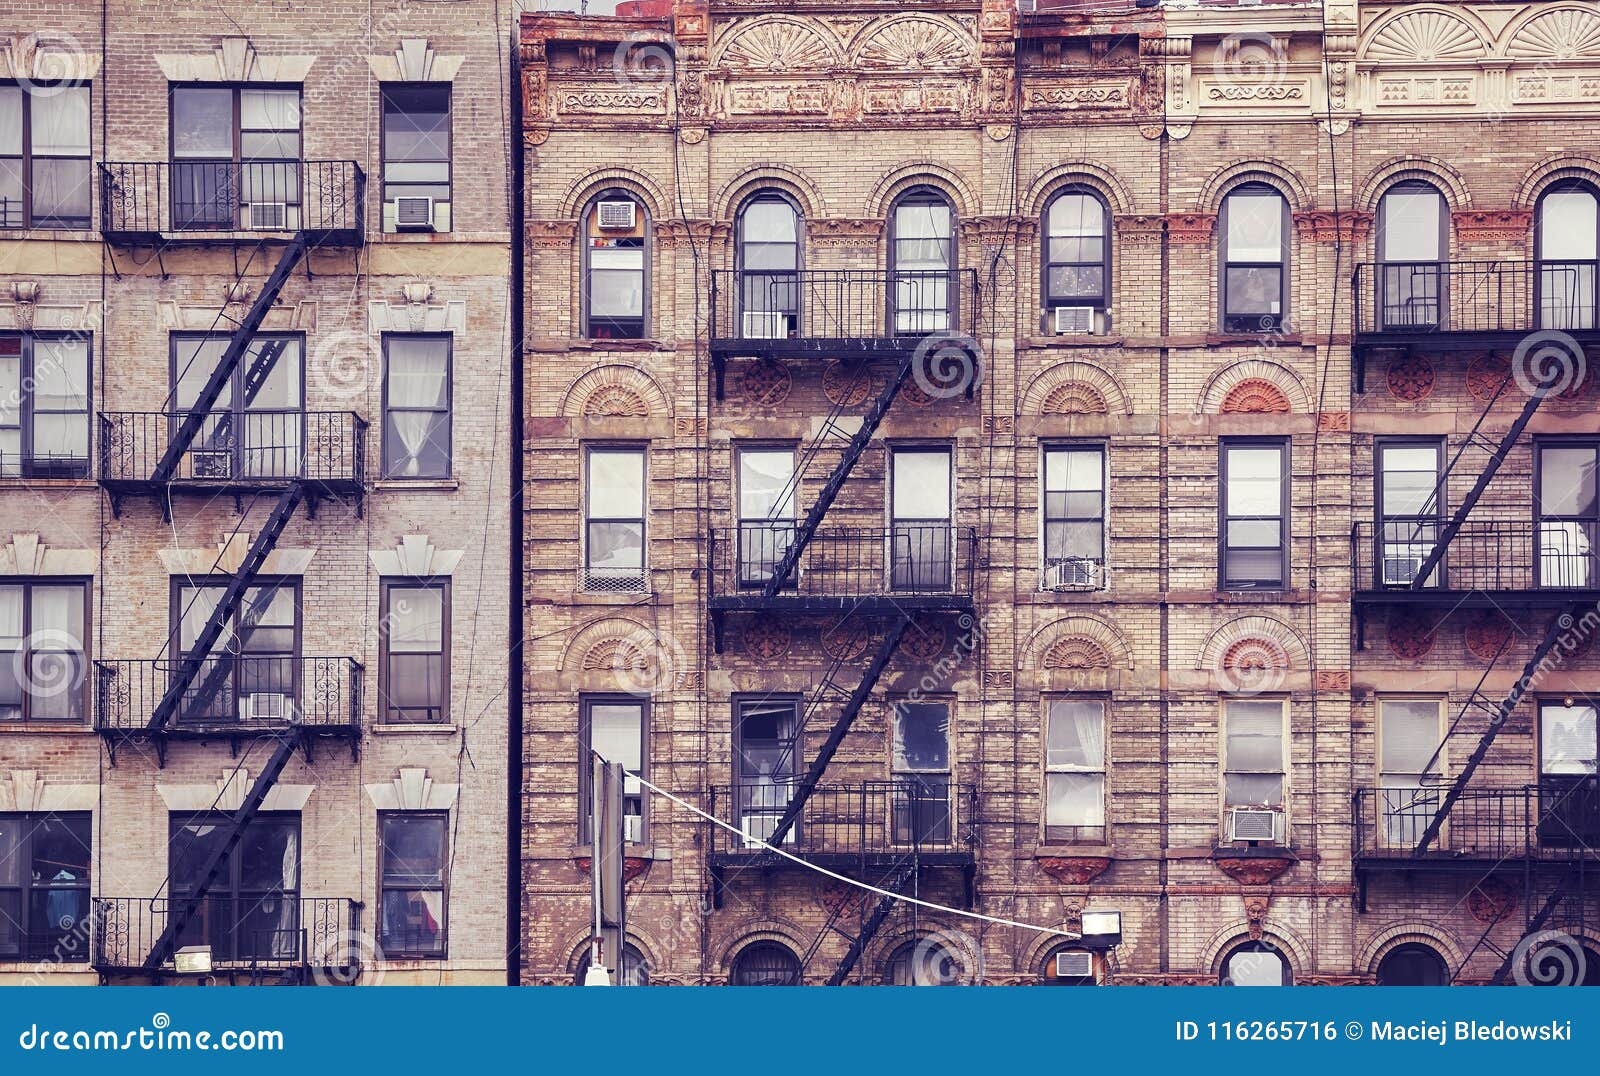 old buildings with fire escapes in new york city.